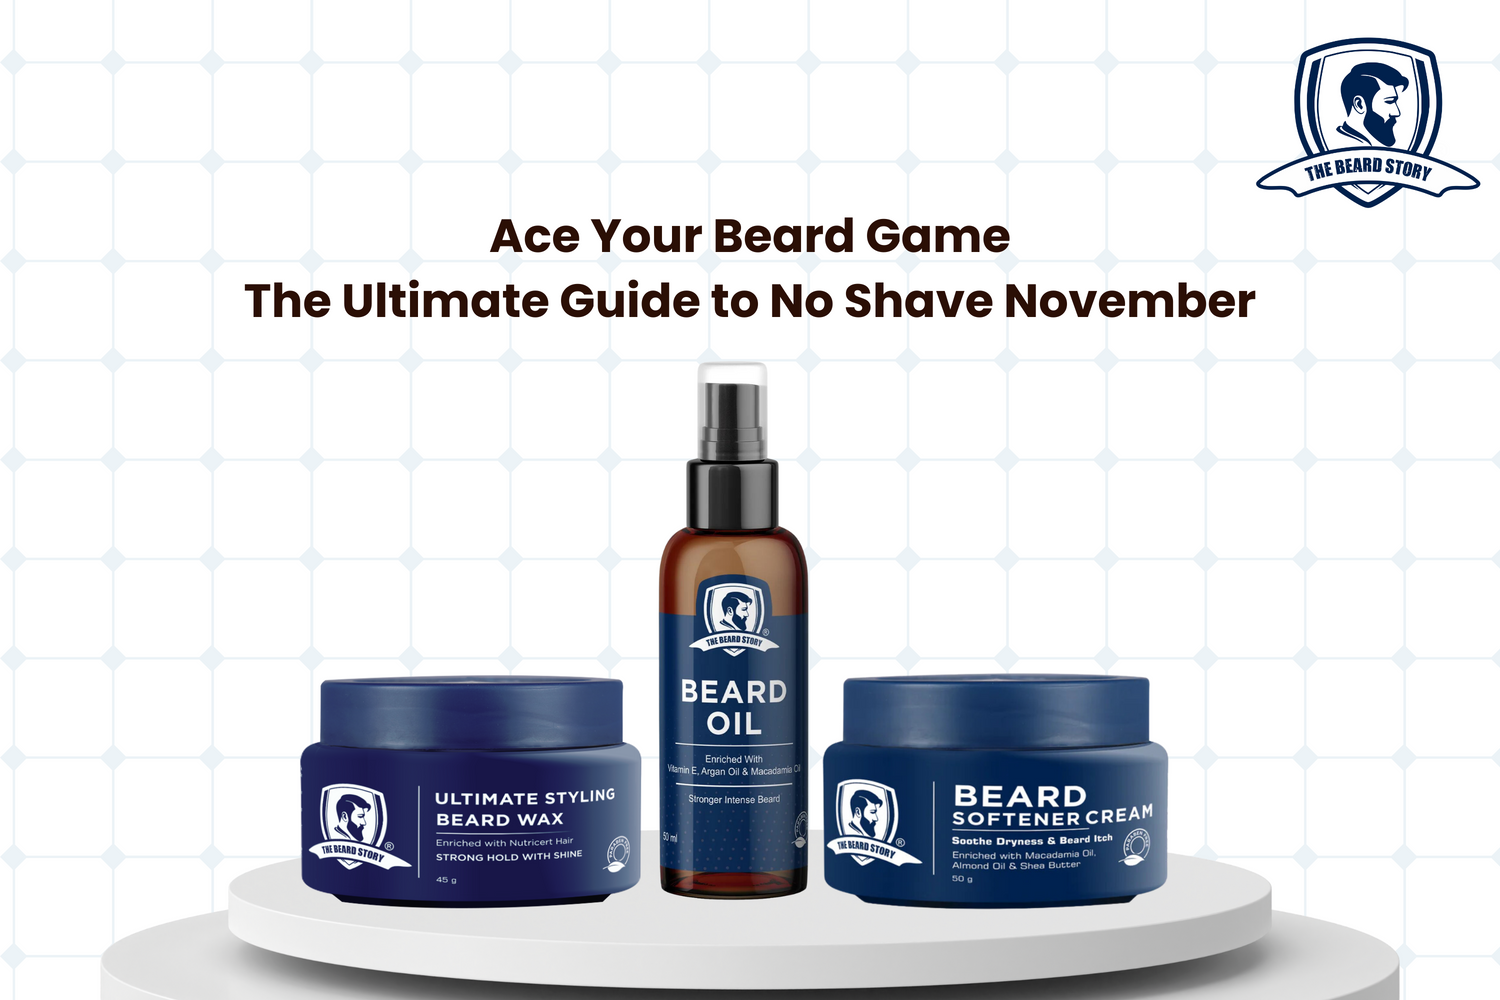 Ace Your Beard Game: The Ultimate Guide to No Shave November